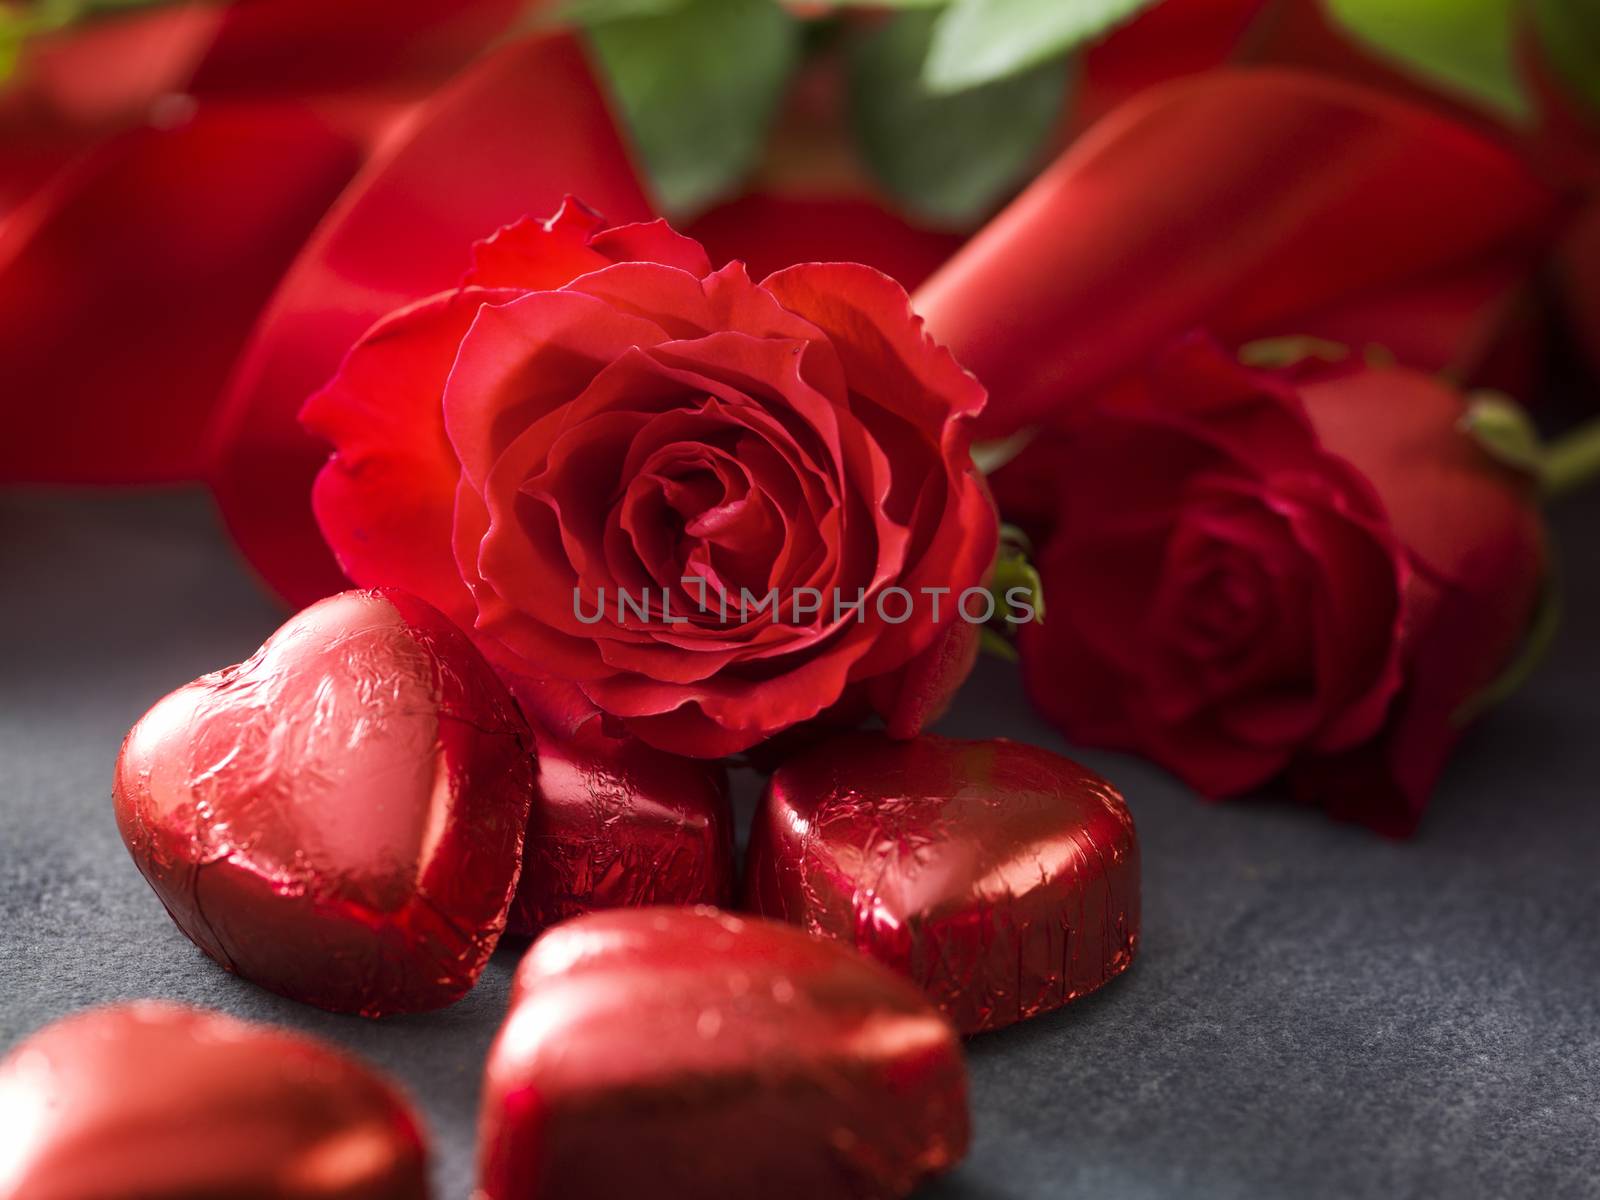 Valentine's day roses with red ribbon and hart shaped chocolate by janssenkruseproductions